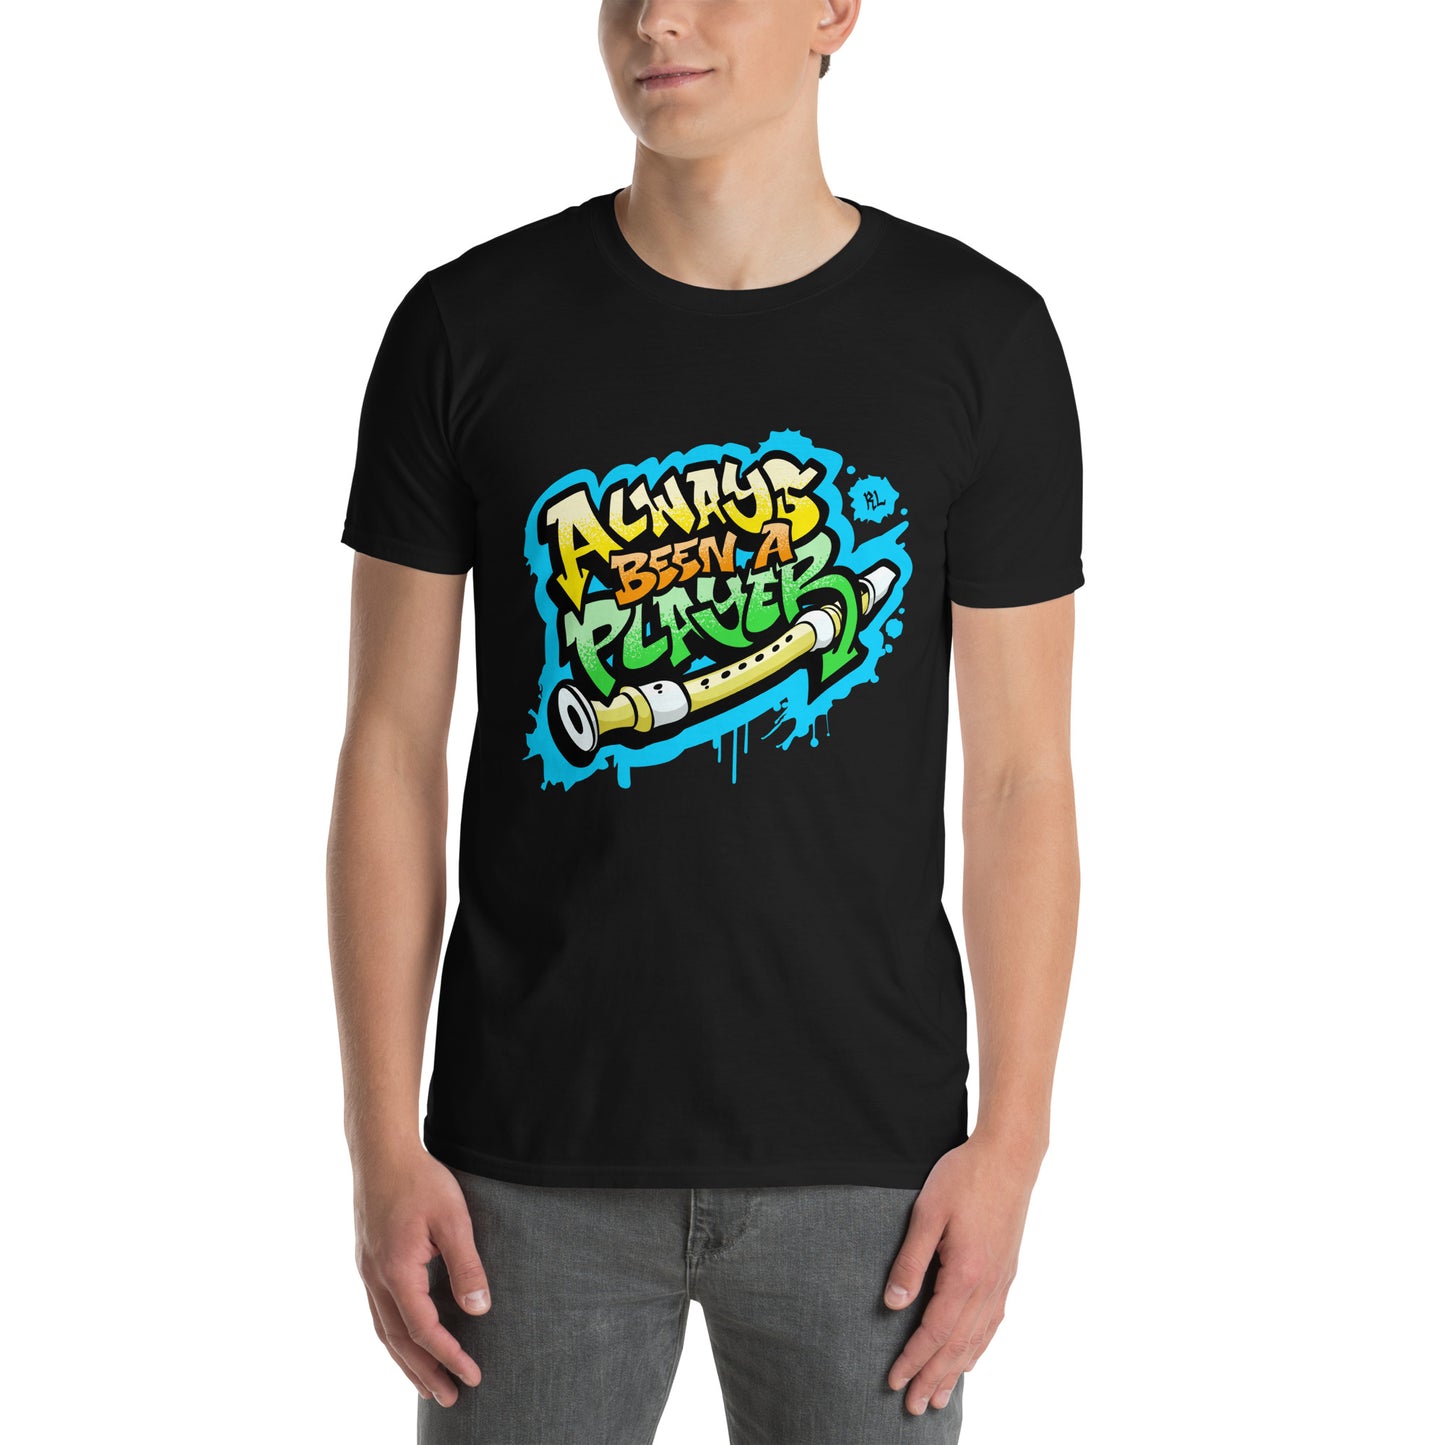 Richard Lindesay Always Been a Player Adult T-Shirt - BLUE BACKGROUND